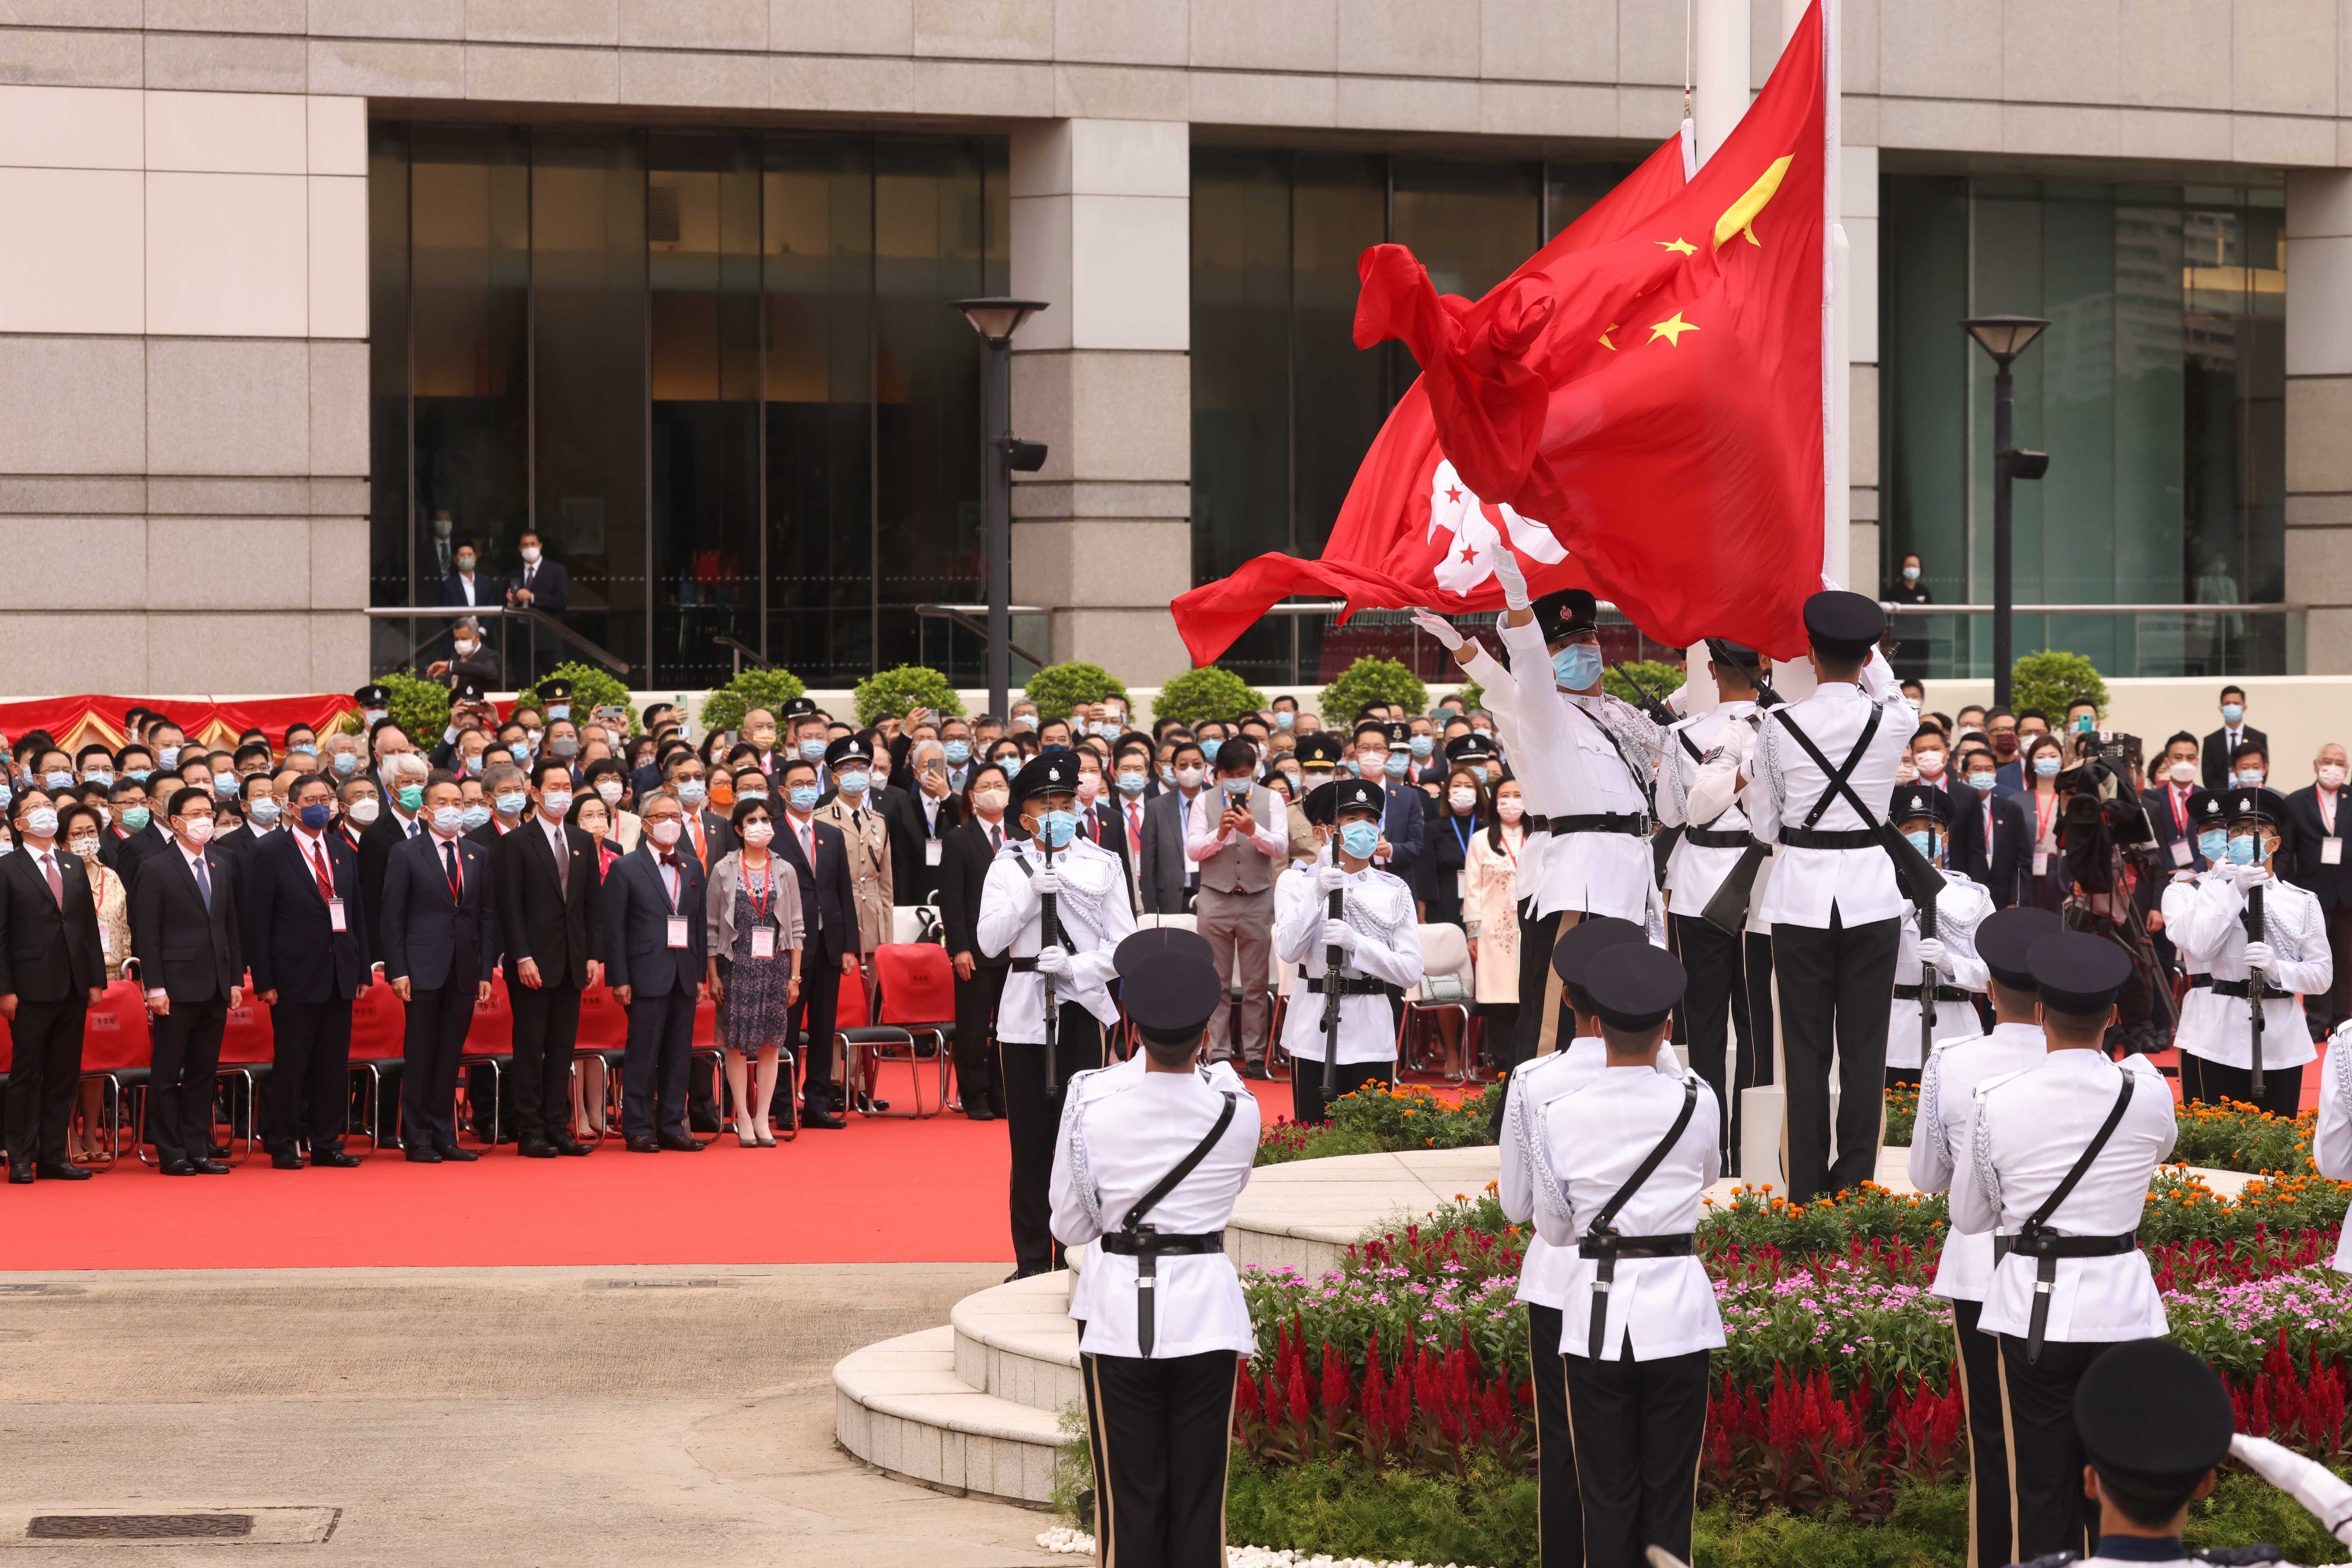 Hong Kong marks the July 1 anniversary of the city’s handover with a flag-raising ceremony on Thursday morning. Photo: K. Y. Cheng